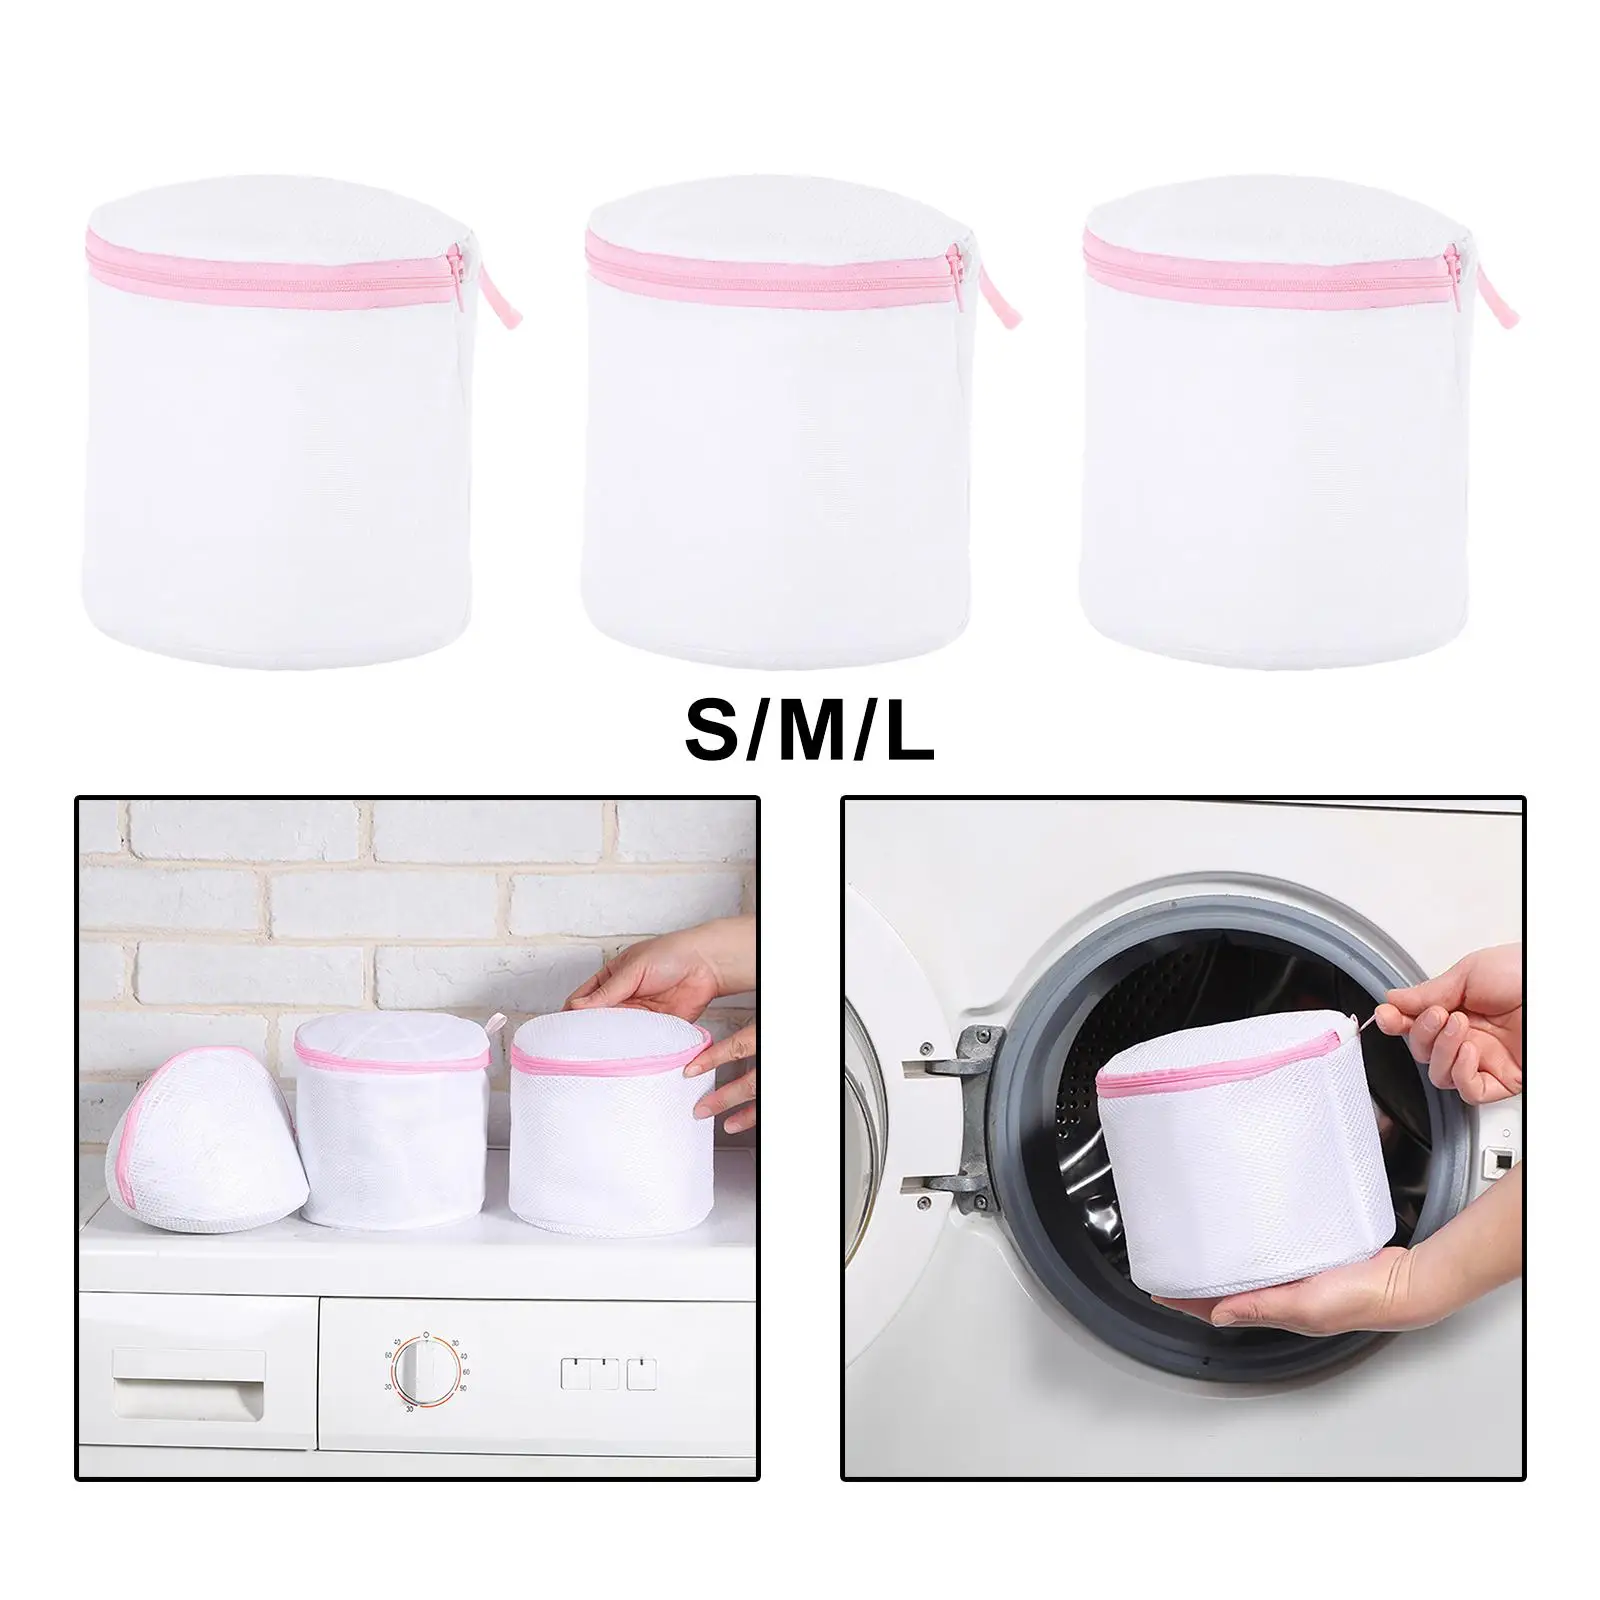 3 Pieces Wash Bag Clothes Organizer Socks Mesh Laundry Net Bags for Stocking